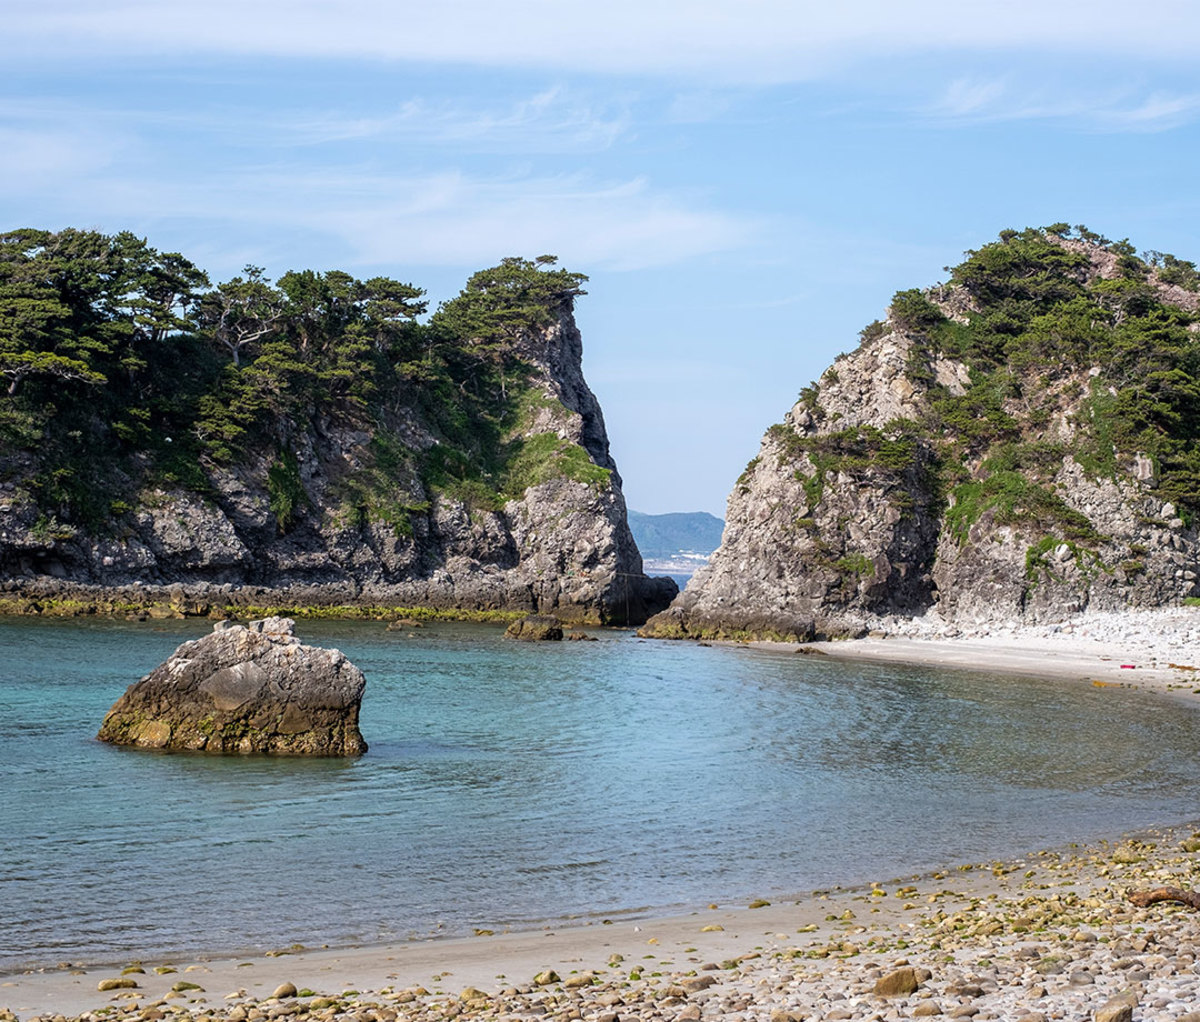 View of the marine blue ocean at the deserted Tomari Beach enclosed by steep rocky cliffs